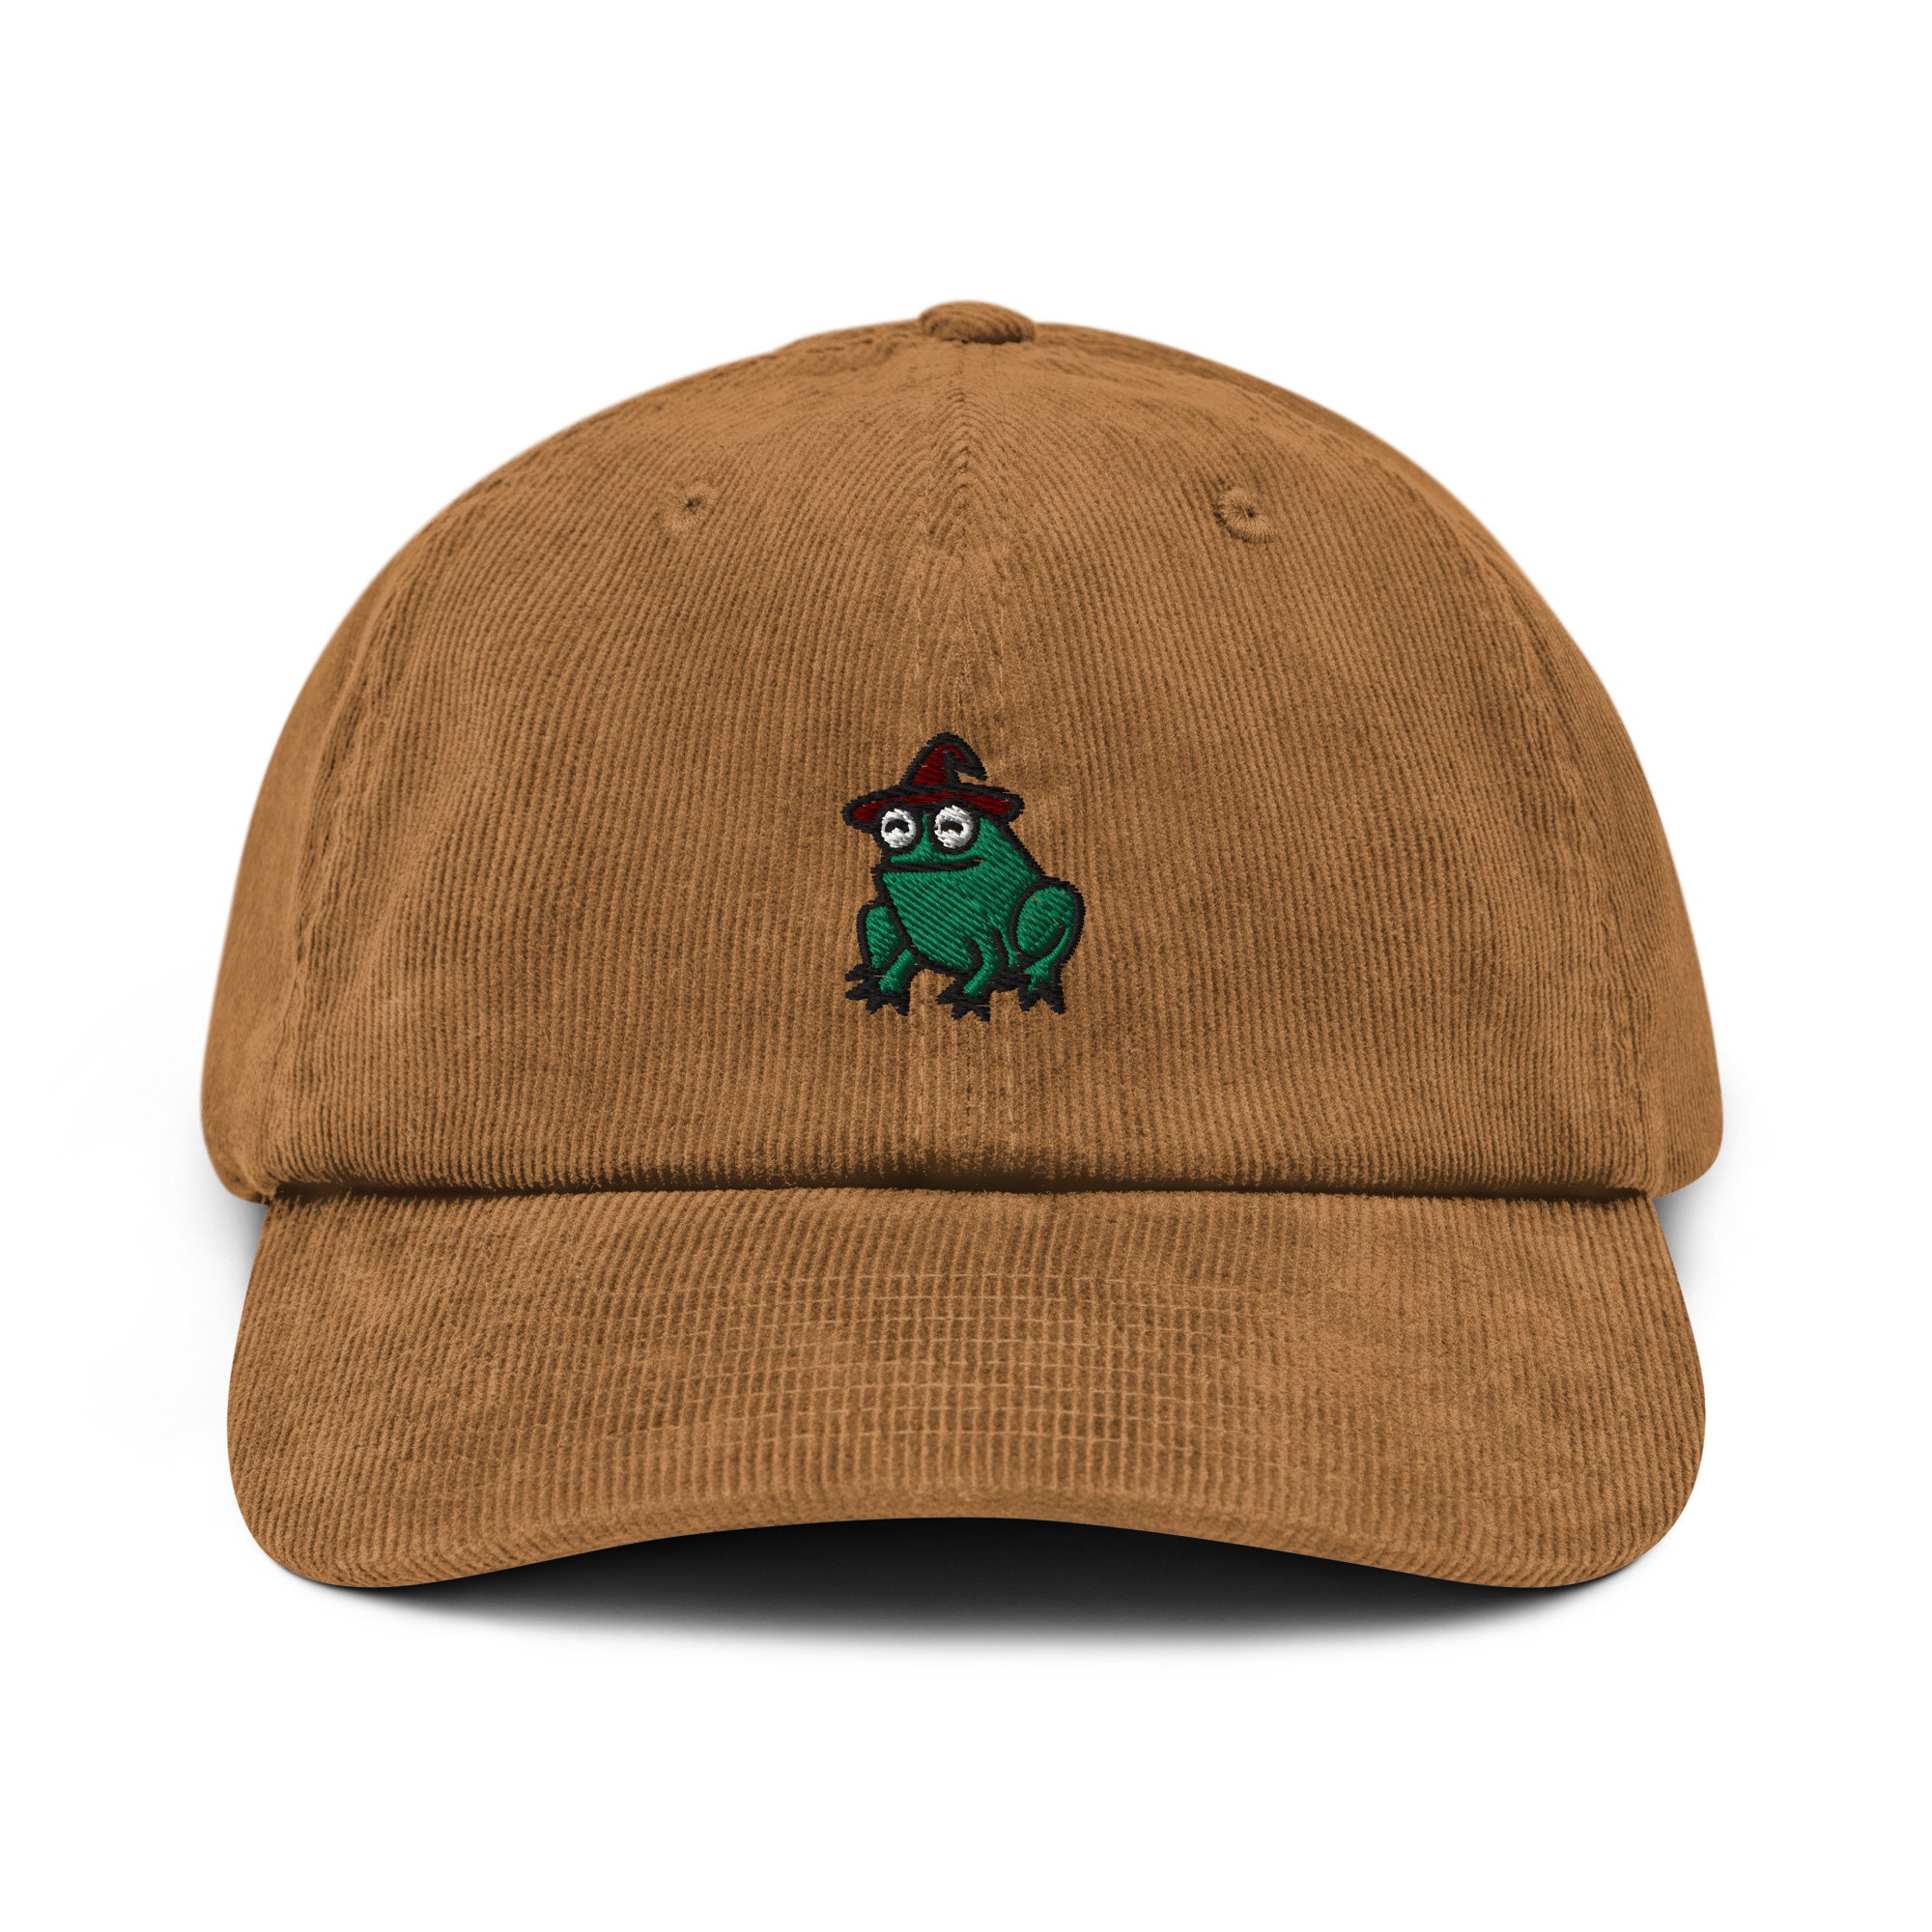 Stylish Embroidered Corduroy Hat - Perfect for Wizards and Frog Lovers